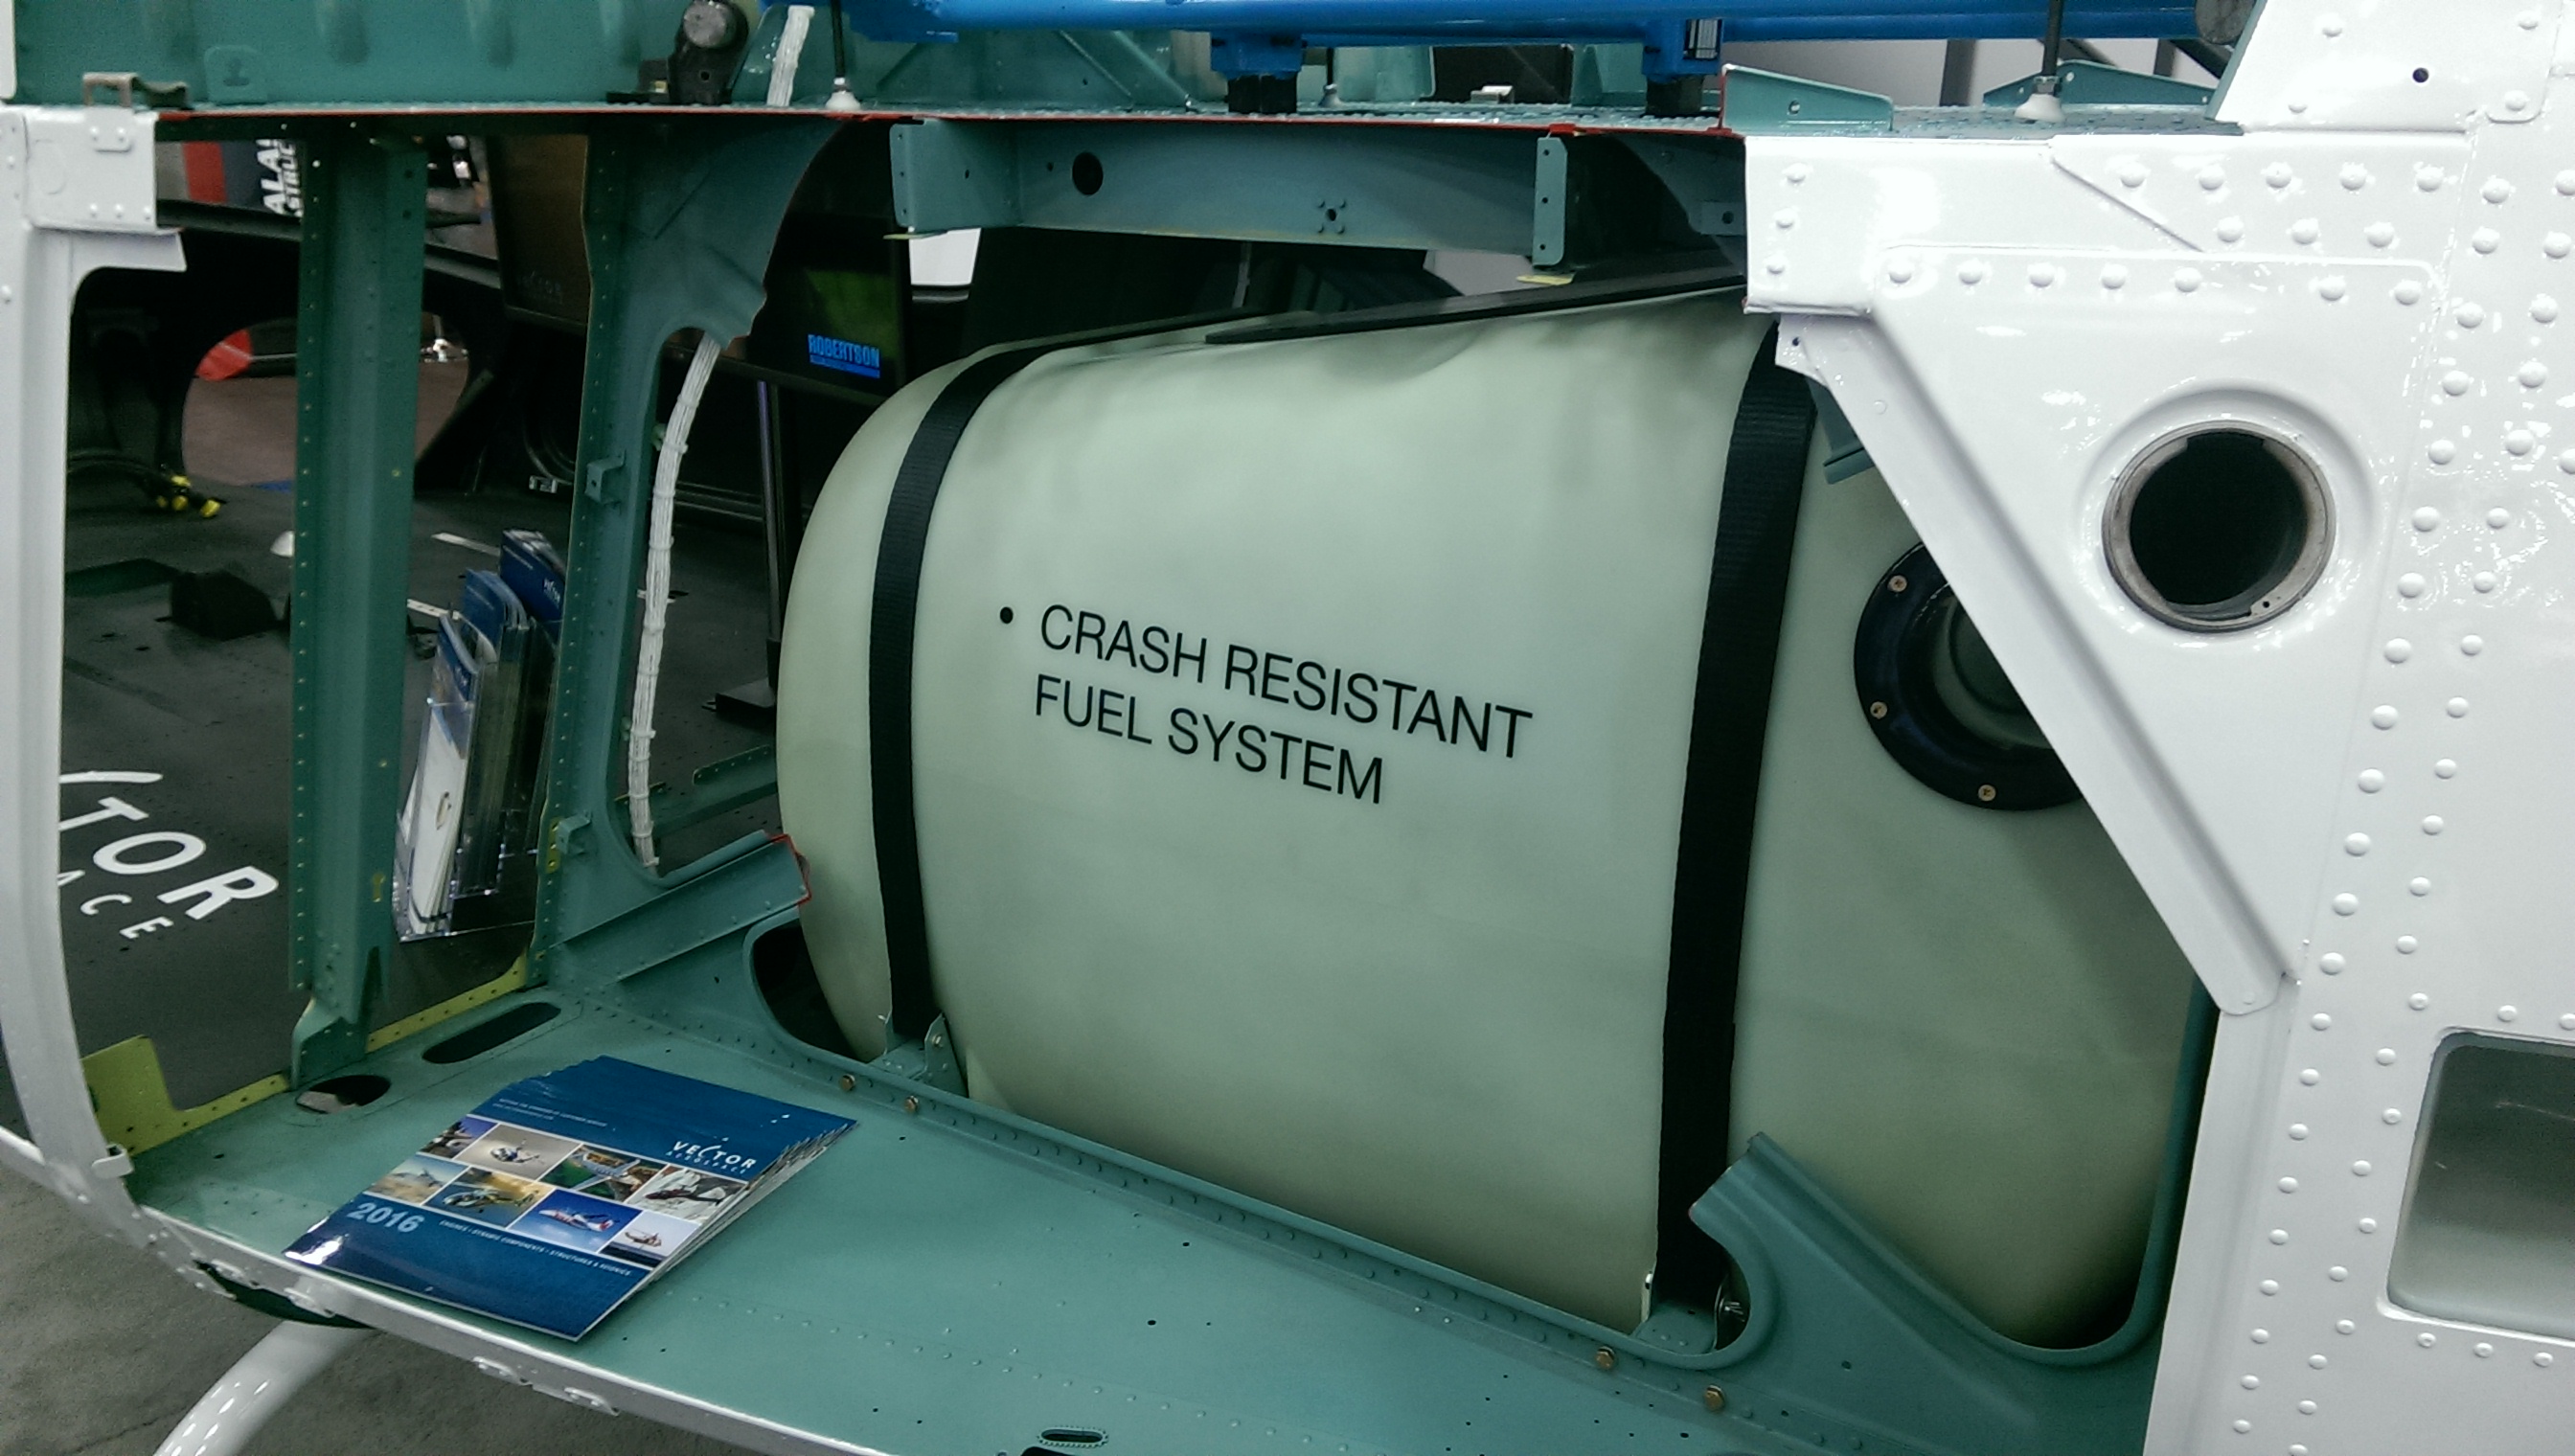 Crash-resistant fuel systems - uptake by civil helicopter operators